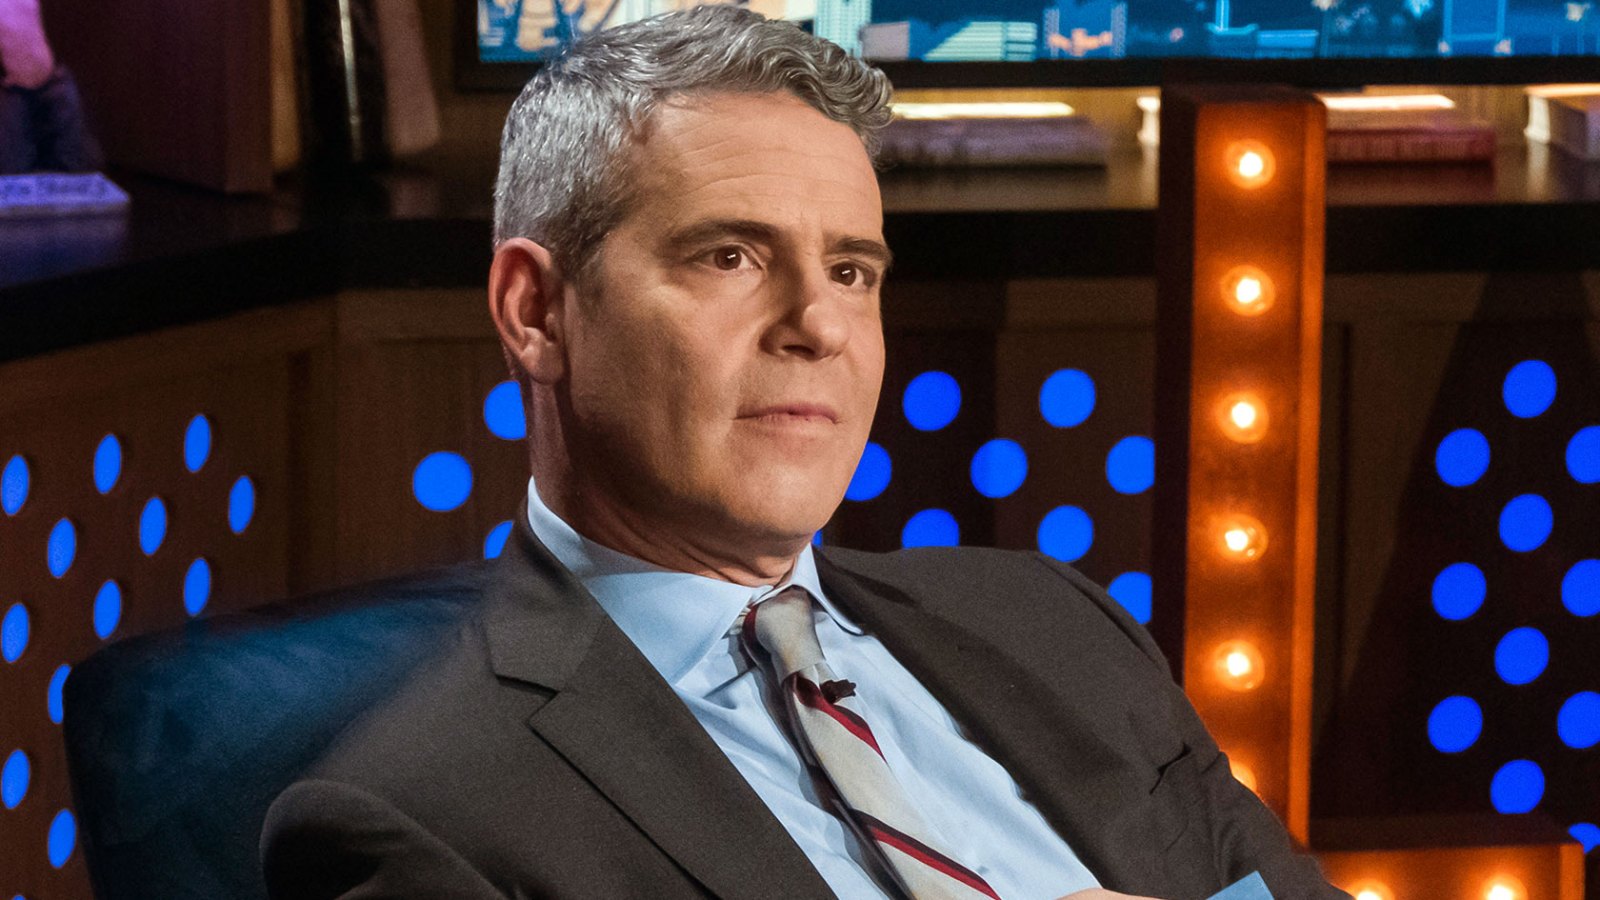 Andy Cohen Dad-Shamed After Dog Chews Up Son's Toy